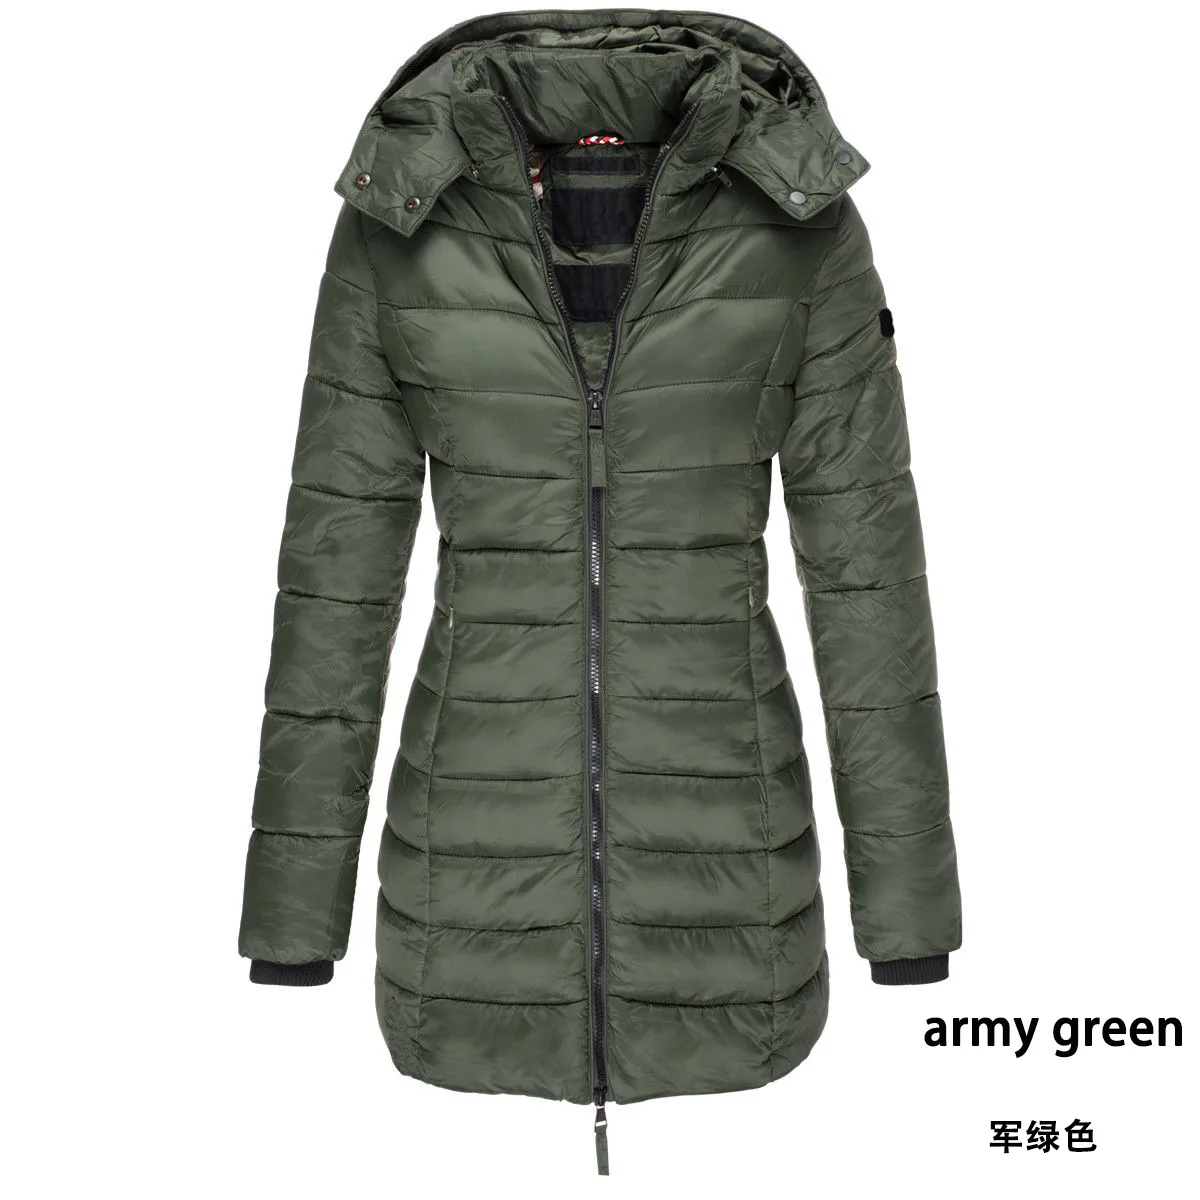 winter coat clothes women Jacket medium long hooded casual down cotton jacket women's quilted coat enlarge